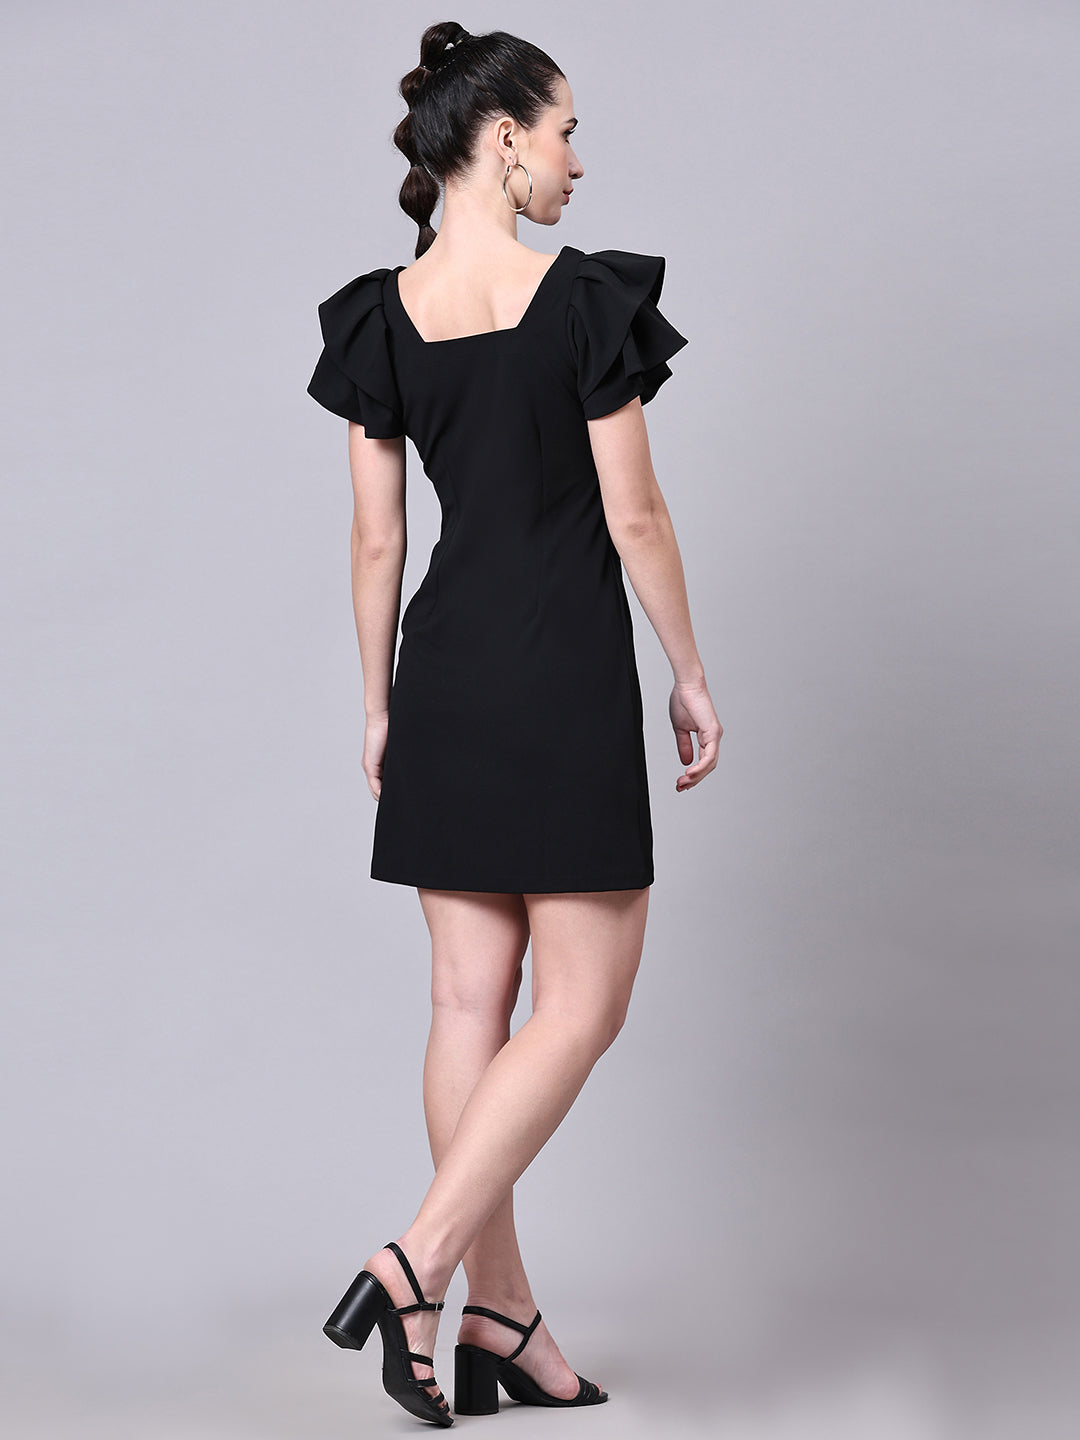 Pomegal Solid Black Bodycon Ruffle Dress